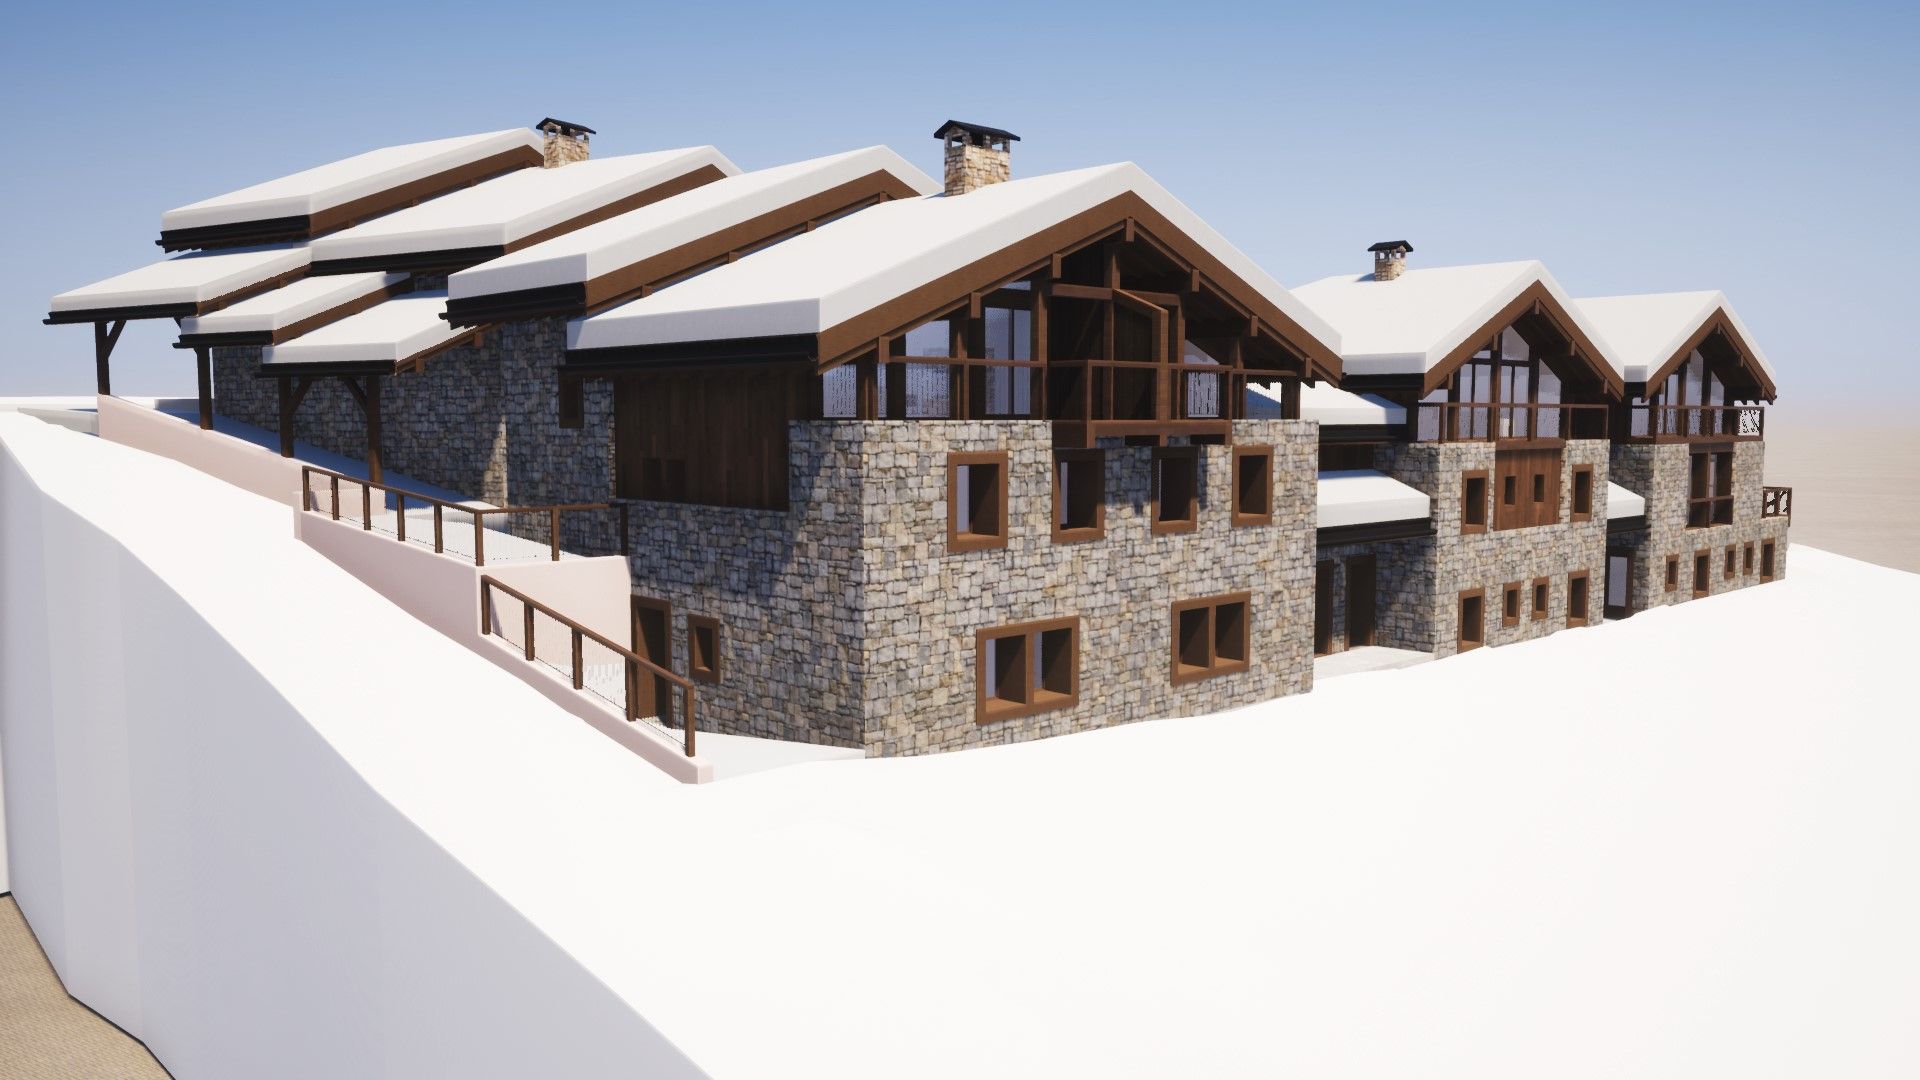 4 bed Chalet For Sale in Three Valleys, French Alps